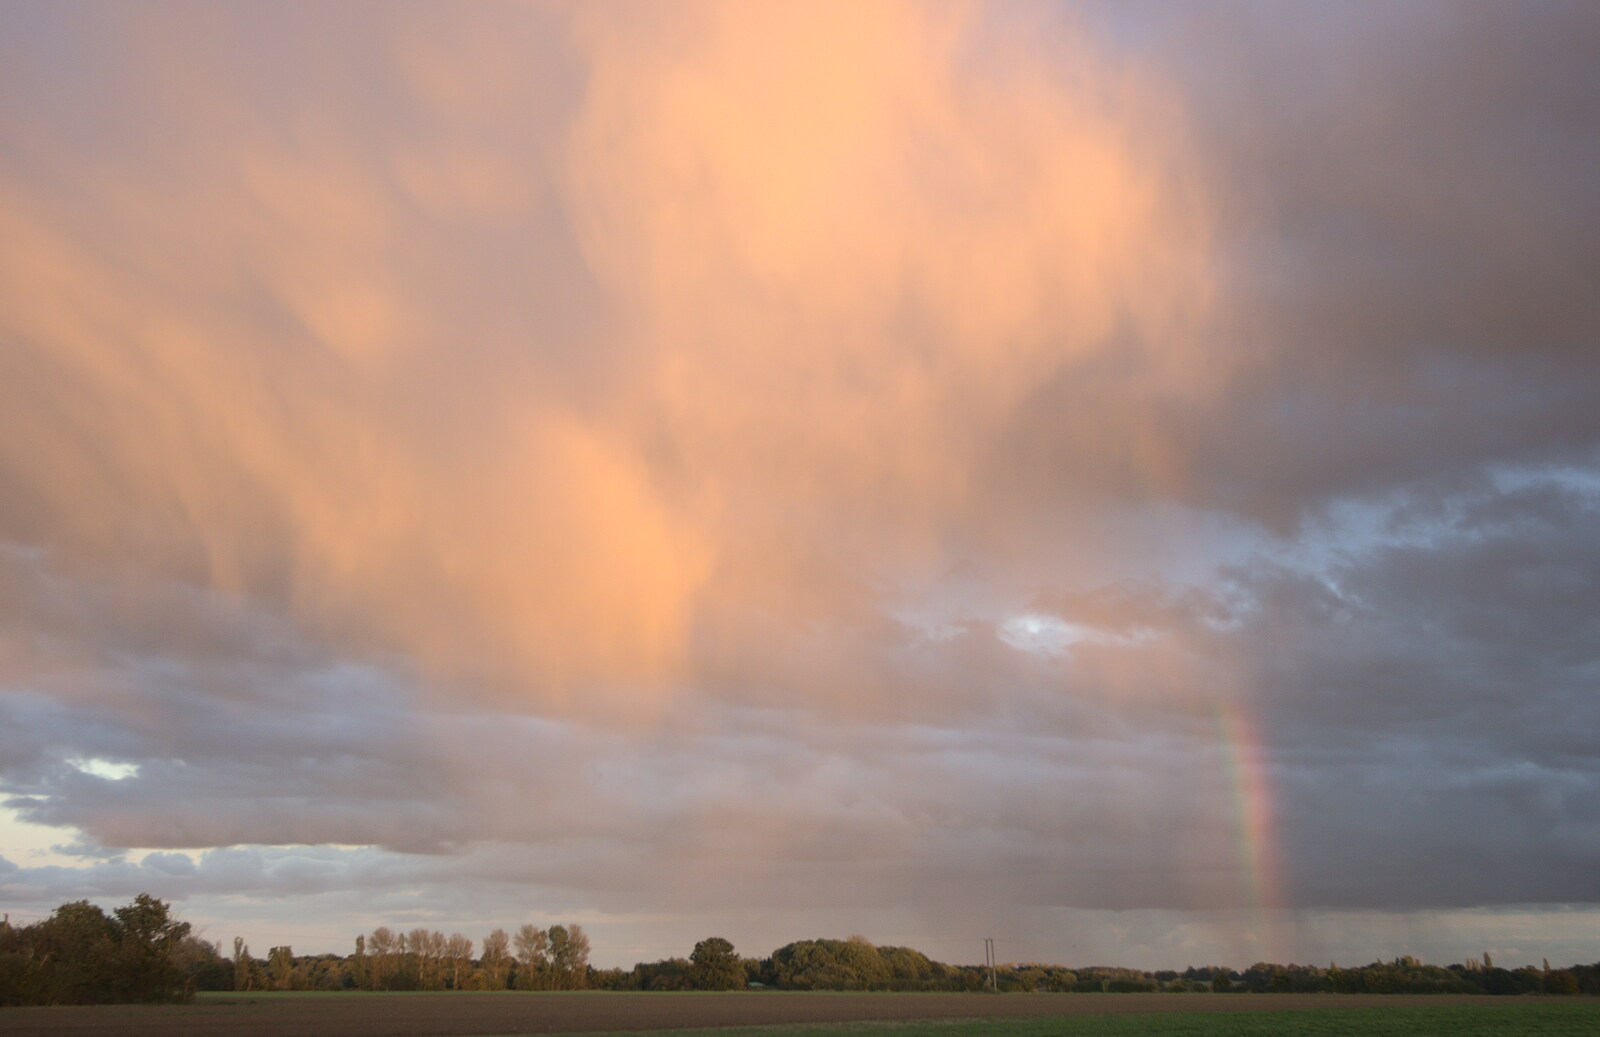 There's a partial rainbow and orange rain from Diss Miscellany, and a Few Hours at Bressingham, Diss and Bressingham, Norfolk - 13th October 2012